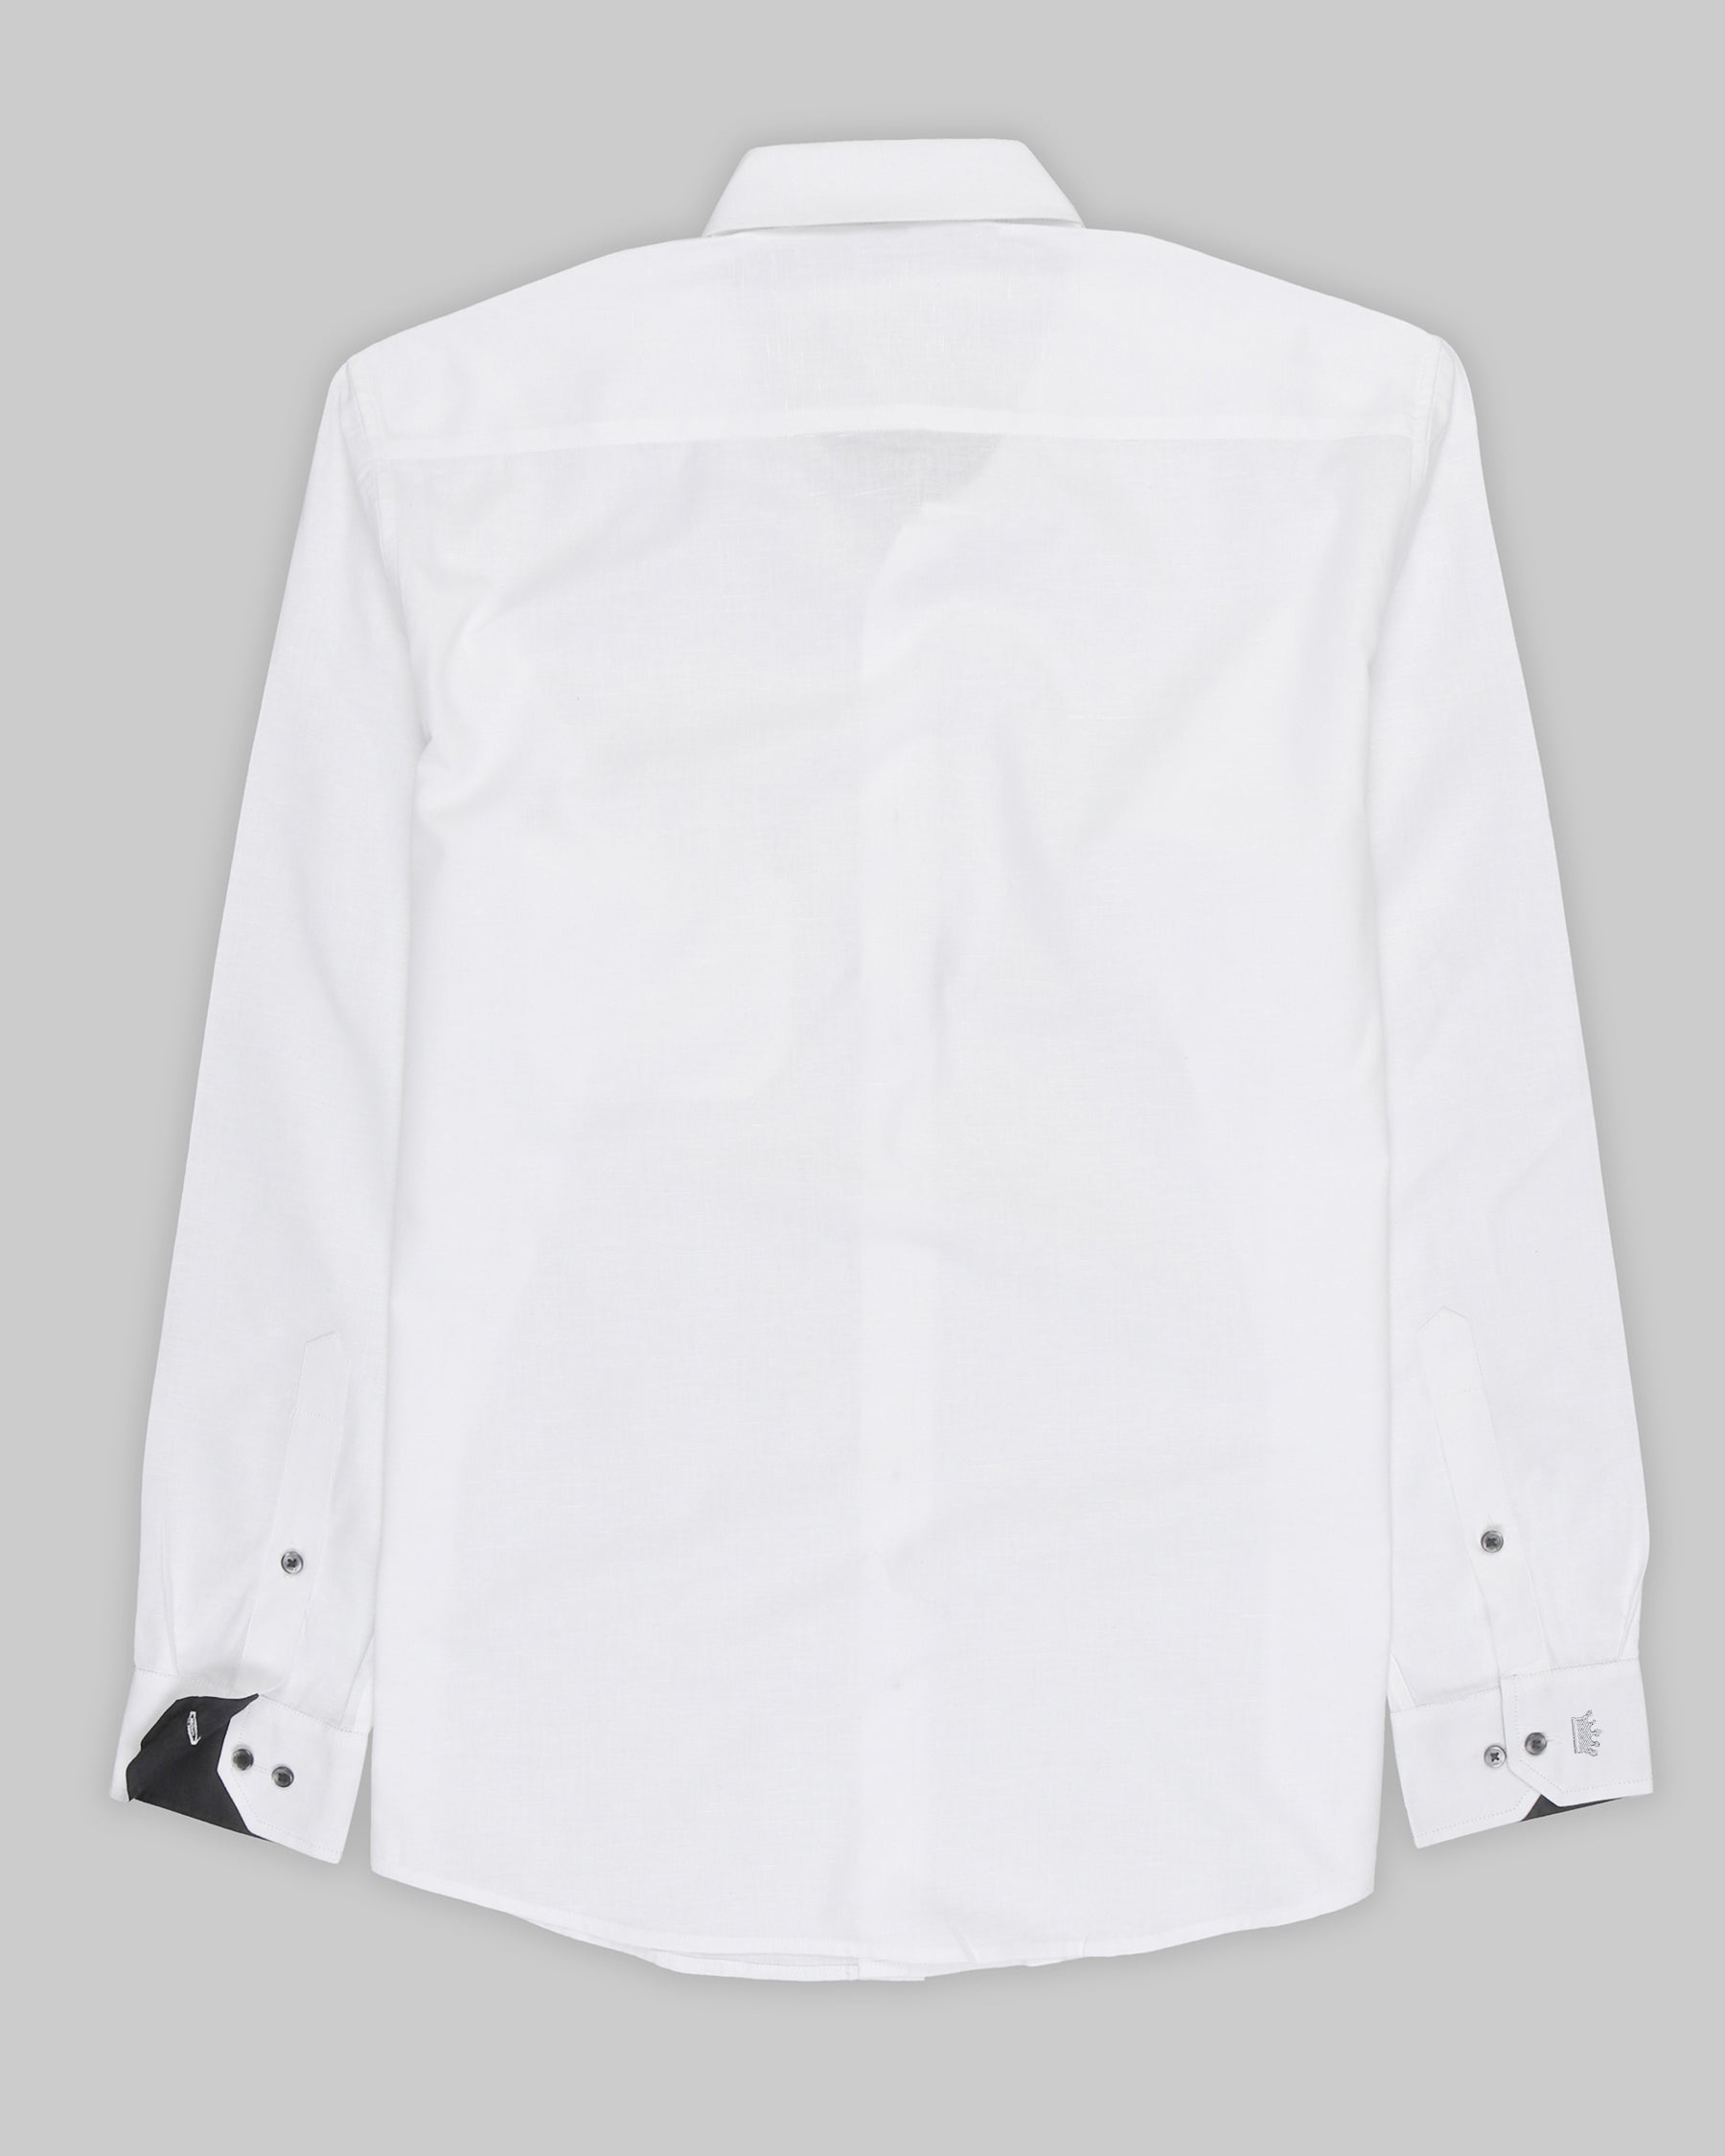 Bright White with Black Patterned Luxurious Linen Shirt 3258BLK-P21-38, 3258BLK-P21-H-38, 3258BLK-P21-39, 3258BLK-P21-H-39, 3258BLK-P21-40, 3258BLK-P21-H-40, 3258BLK-P21-42, 3258BLK-P21-H-42, 3258BLK-P21-44, 3258BLK-P21-H-44, 3258BLK-P21-46, 3258BLK-P21-H-46, 3258BLK-P21-48, 3258BLK-P21-H-48, 3258BLK-P21-50, 3258BLK-P21-H-50, 3258BLK-P21-52, 3258BLK-P21-H-52